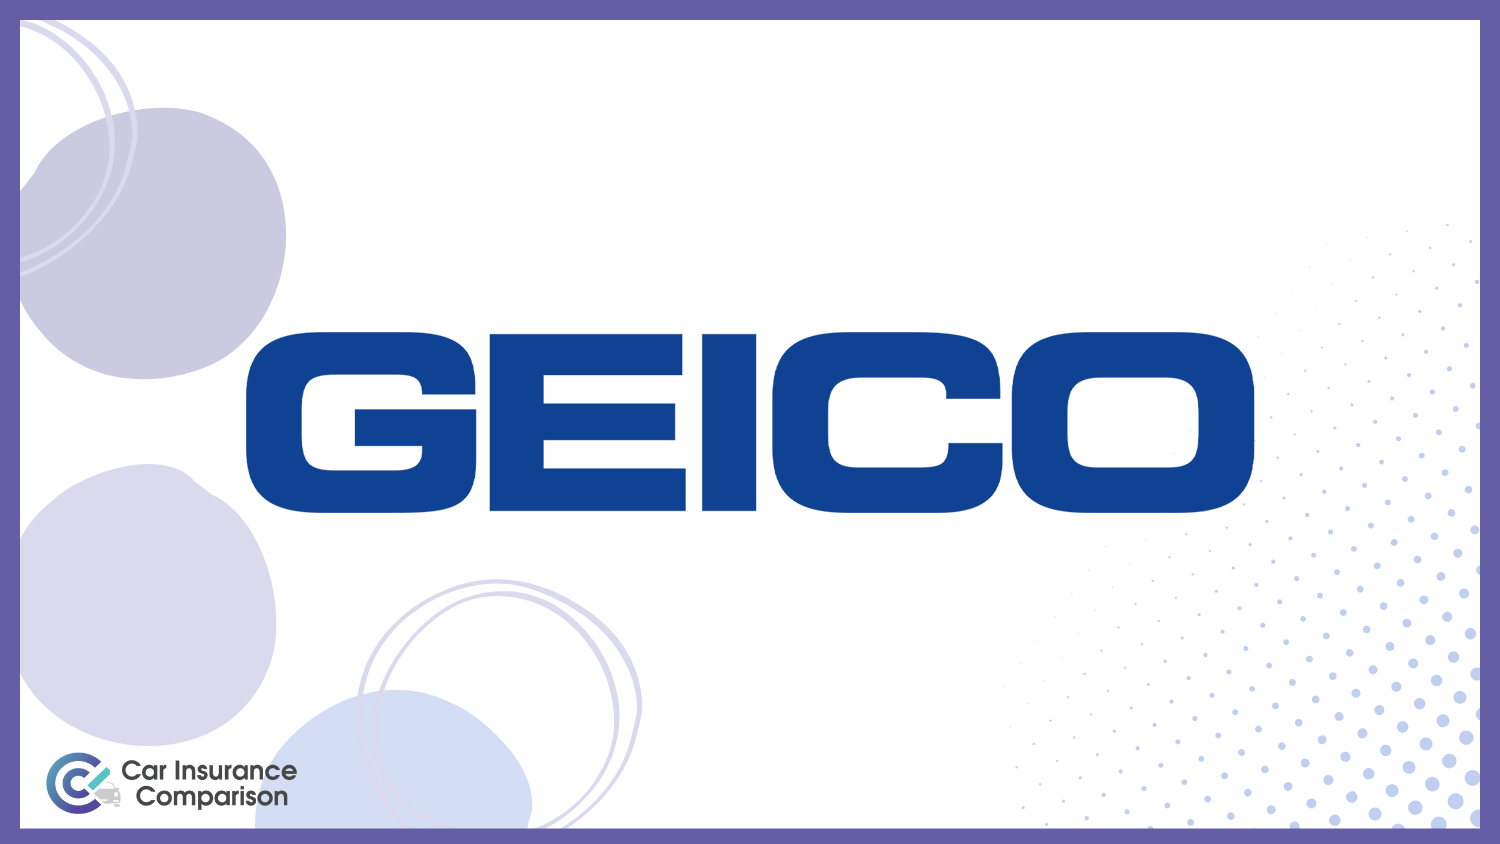 Geico: Best Car Insurance for Specialty Vehicles